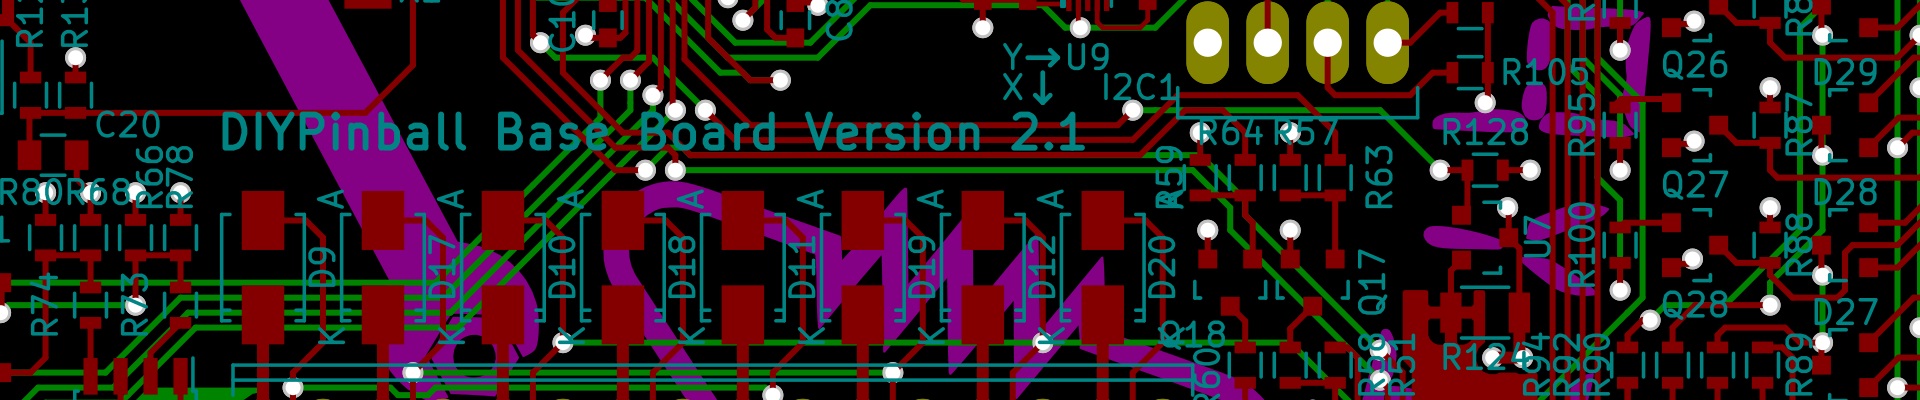 Introducing the 2013 Christmas PCBs